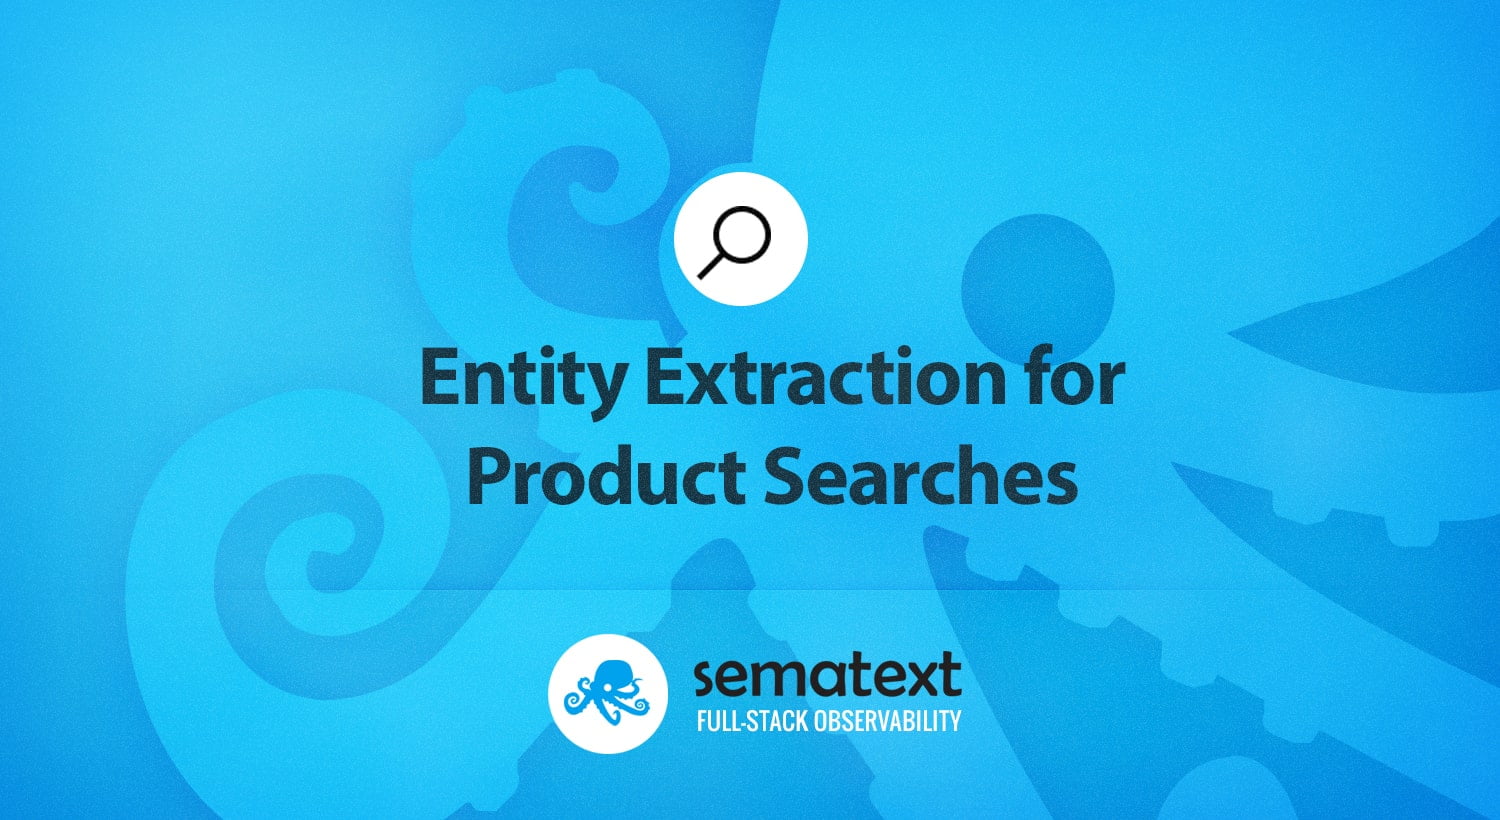 Entity Extraction for Product Searches